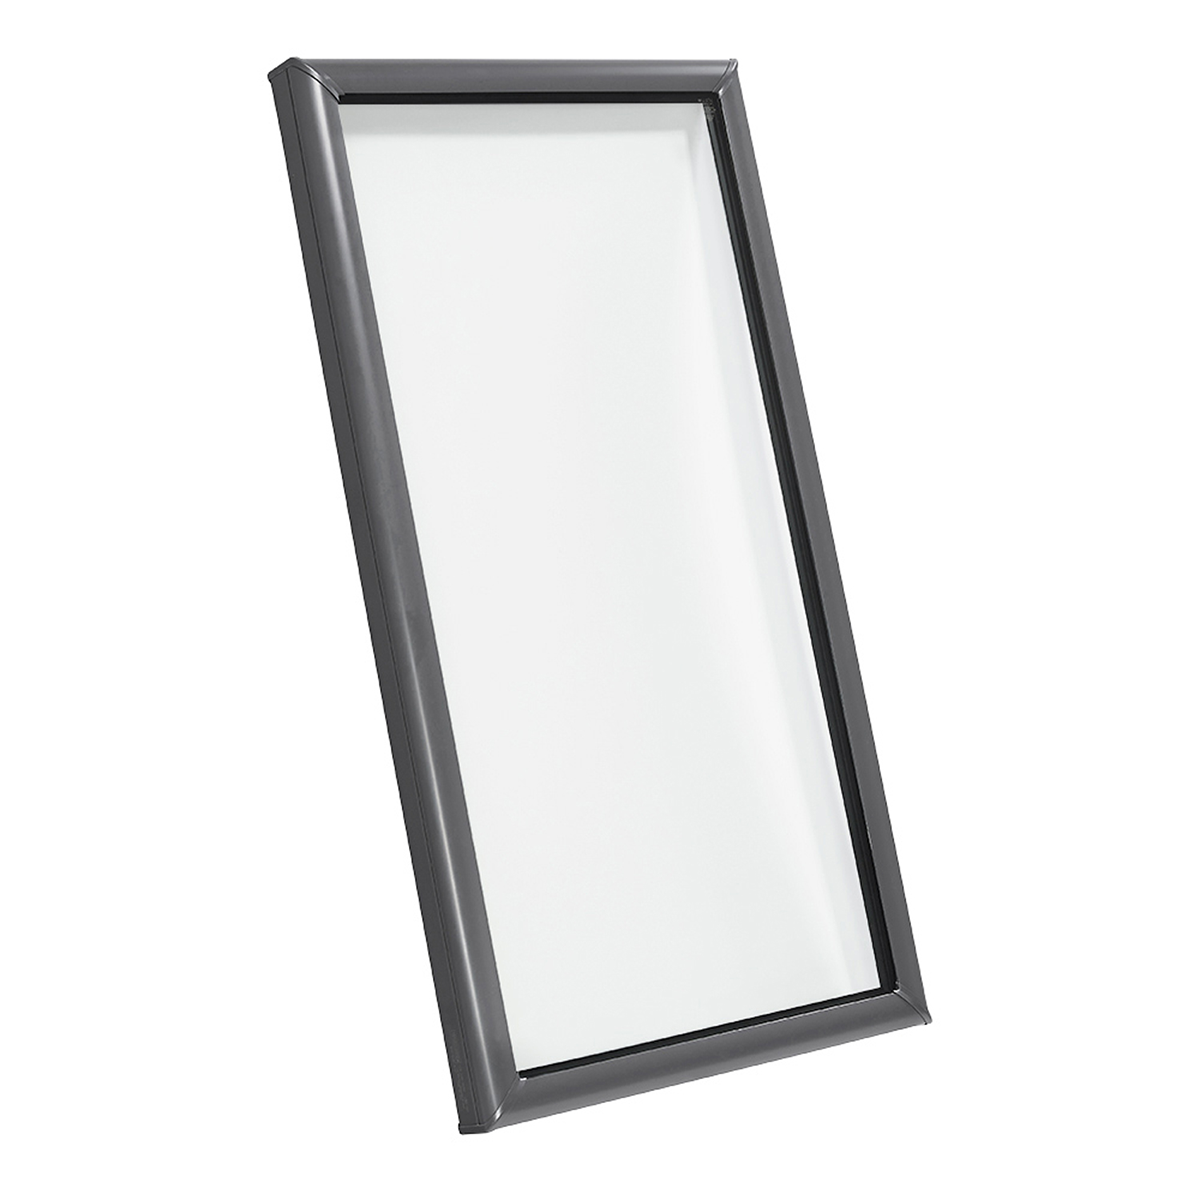 Fixed Curb-Mount Skylight with Laminated Low-E3 Glass - 34-1/2 in. x 34-1/2 in. - FCM 3434